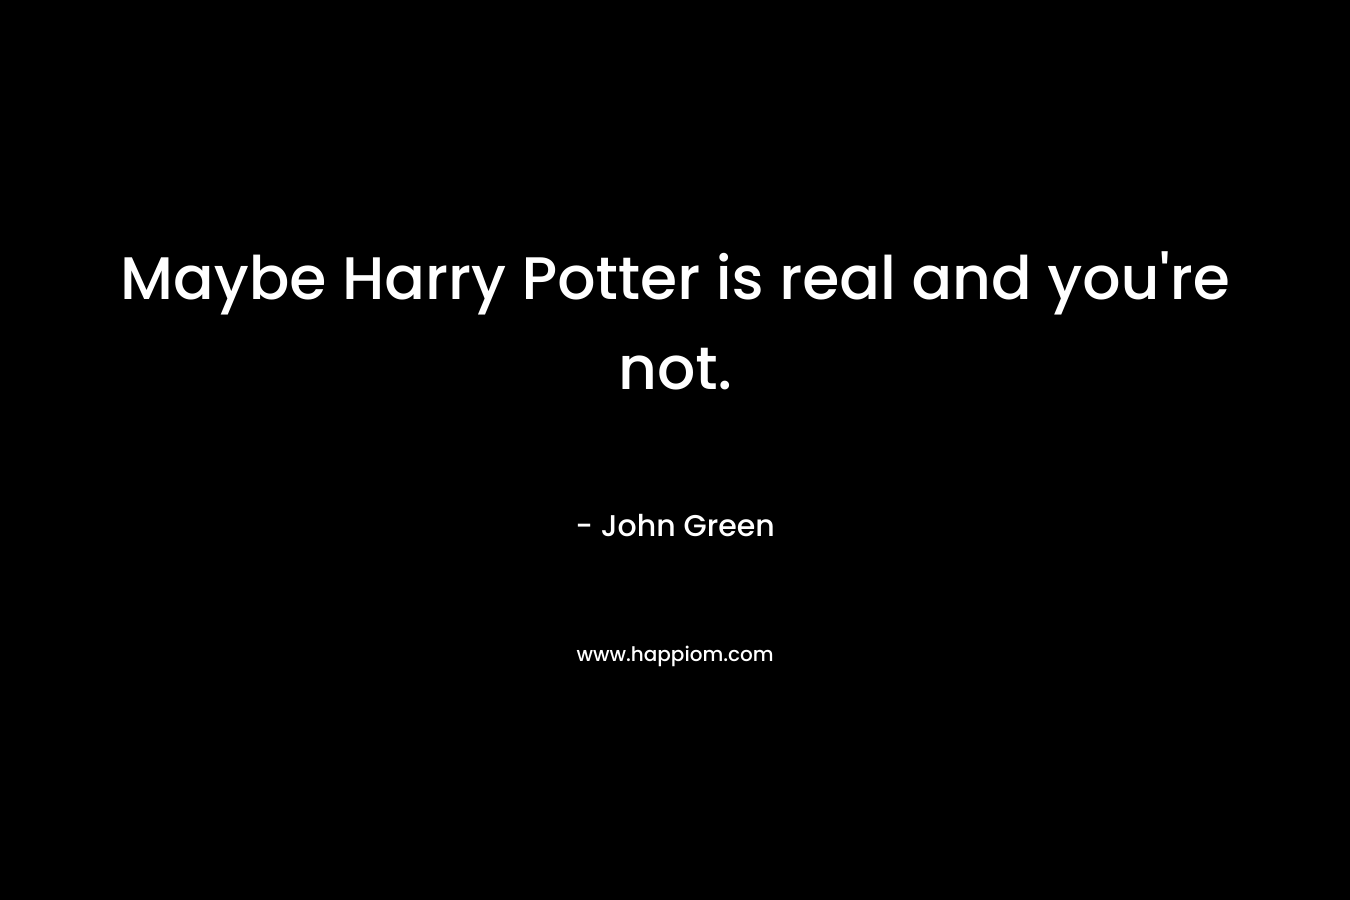 Maybe Harry Potter is real and you’re not. – John Green